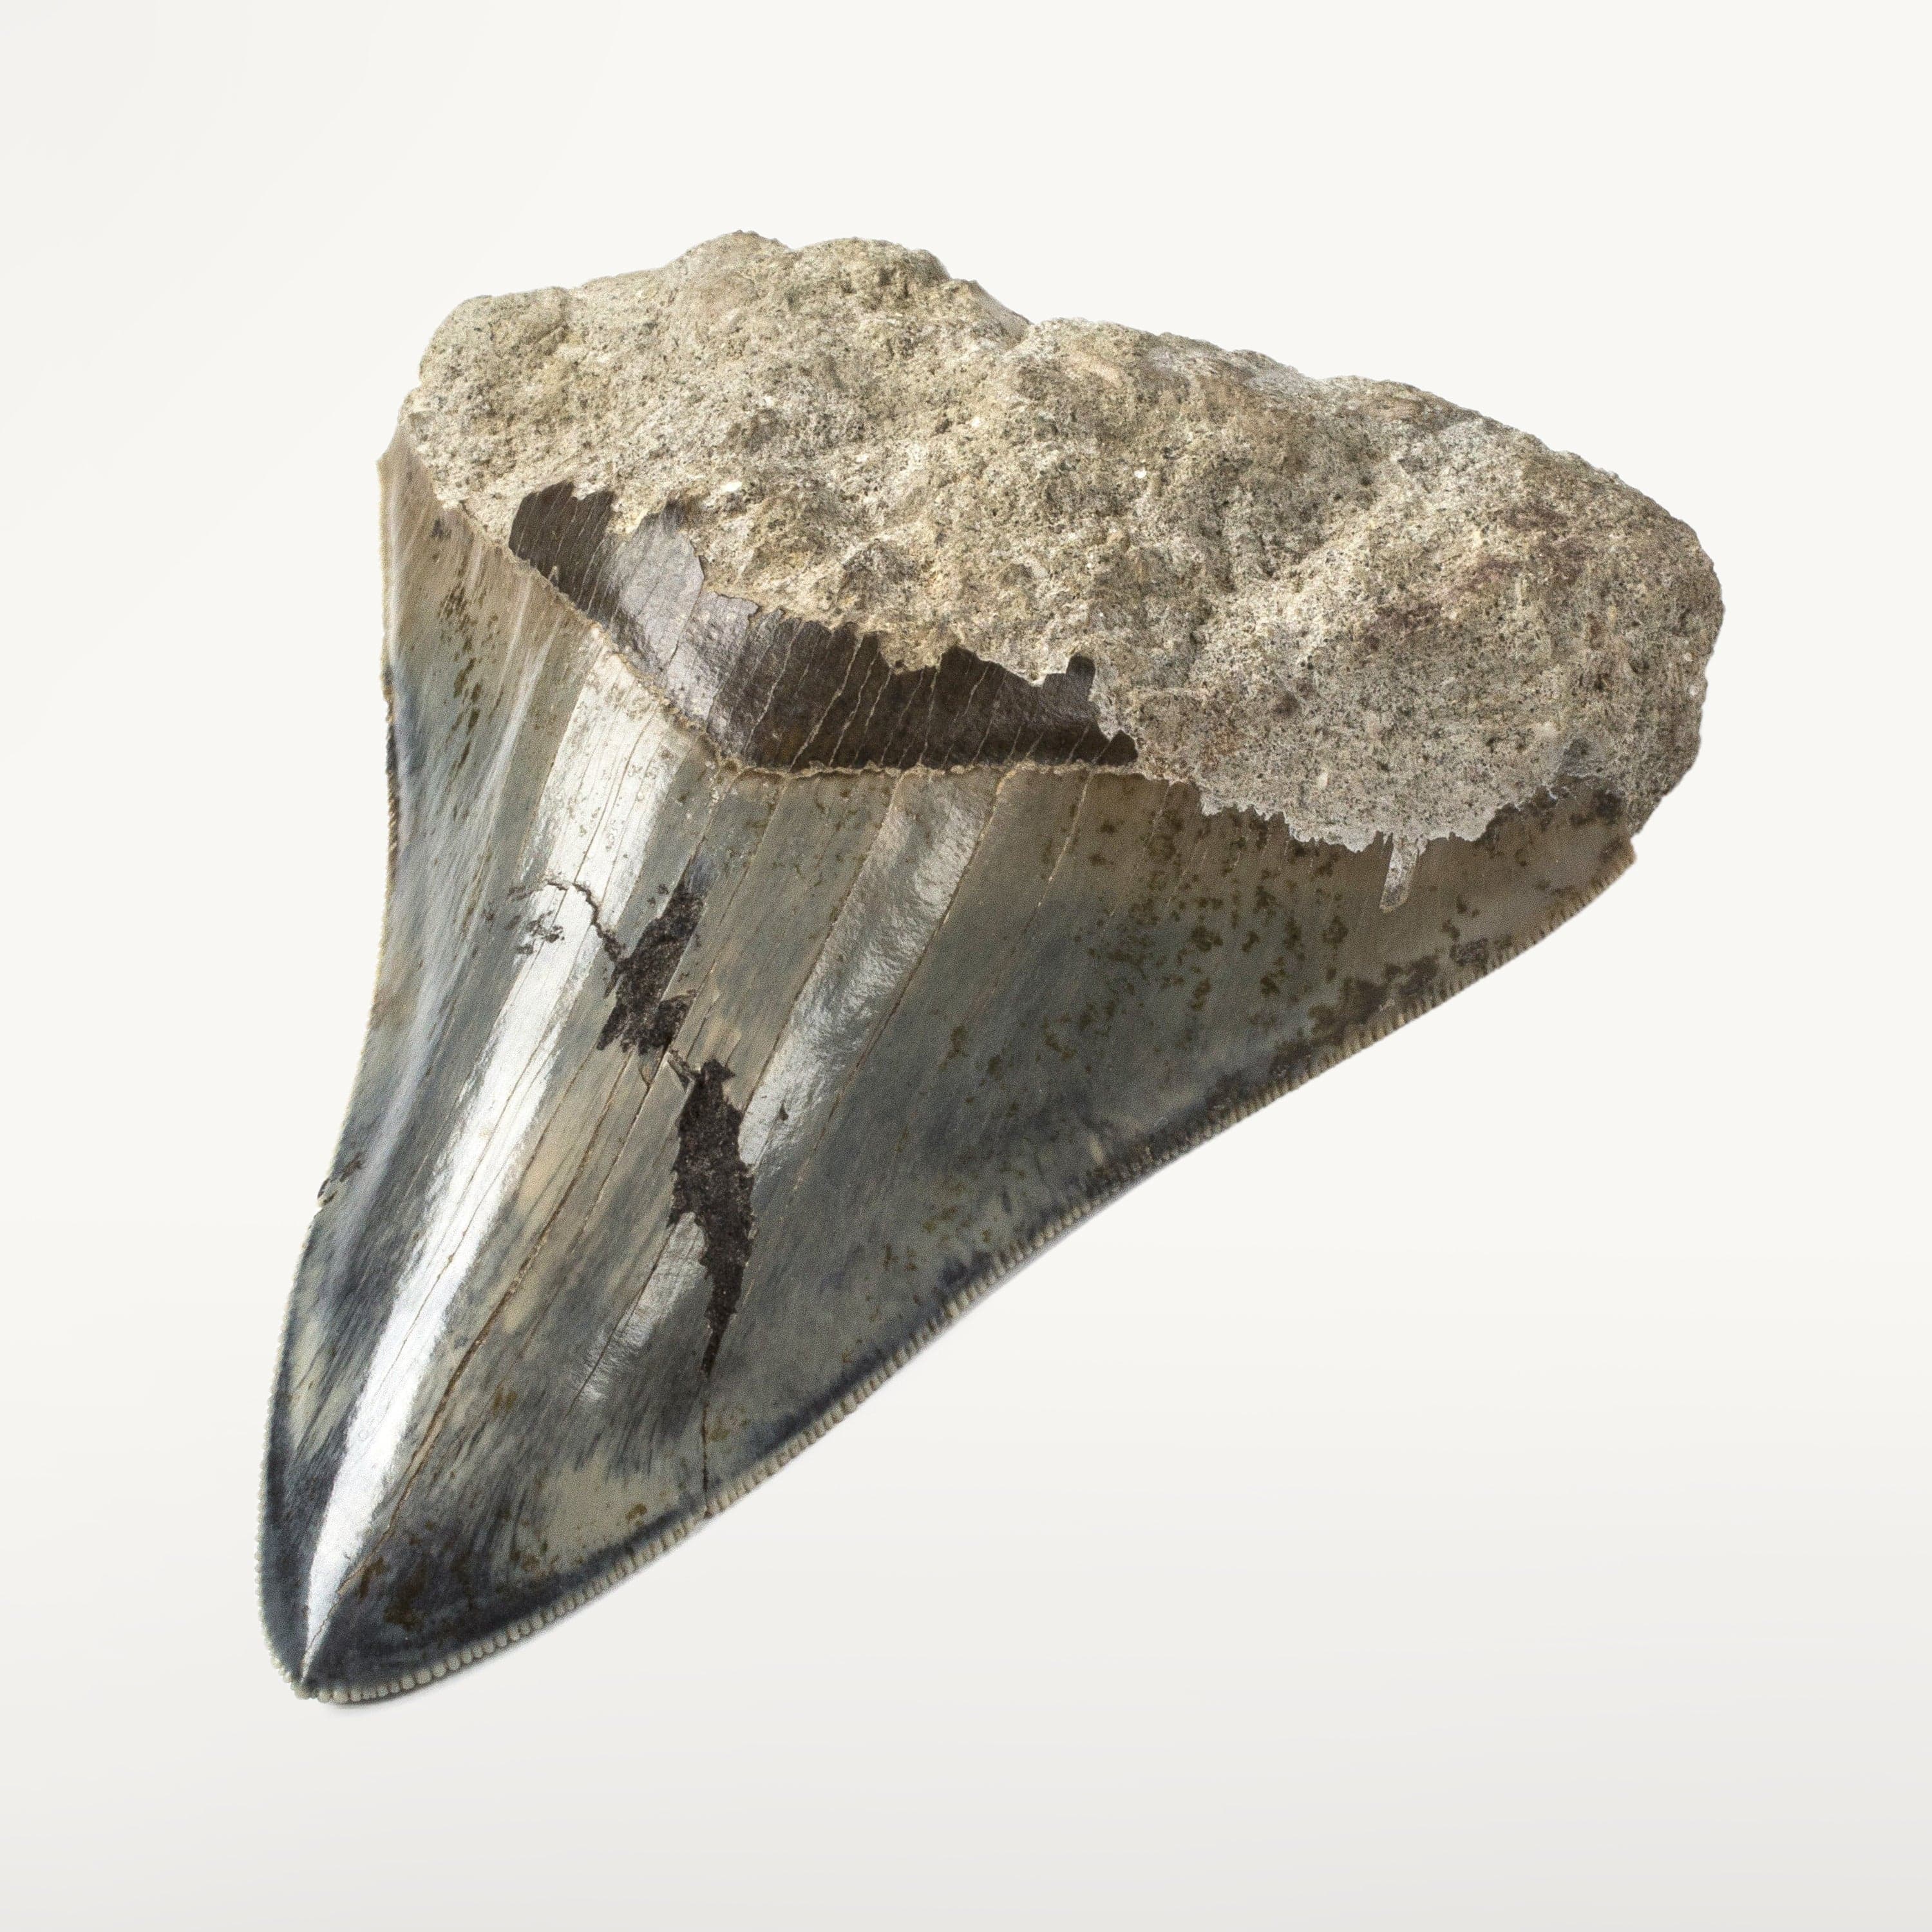 Kalifano Megalodon Teeth Natural Megalodon Tooth from Indonesia - 4.2" ST3000.001